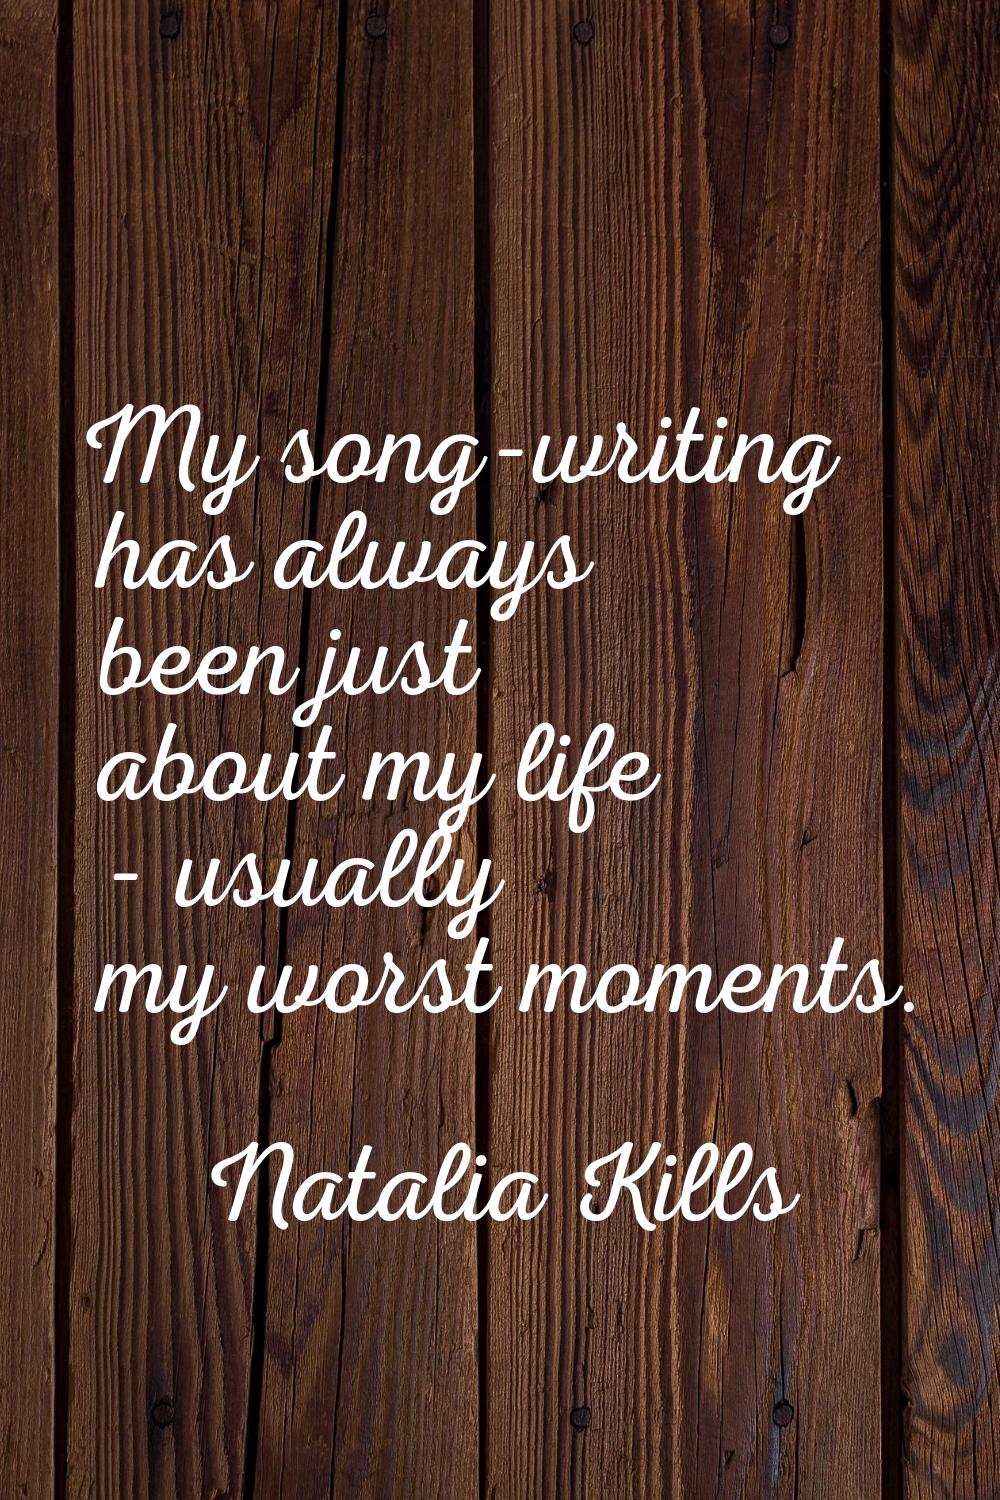 My song-writing has always been just about my life - usually my worst moments.